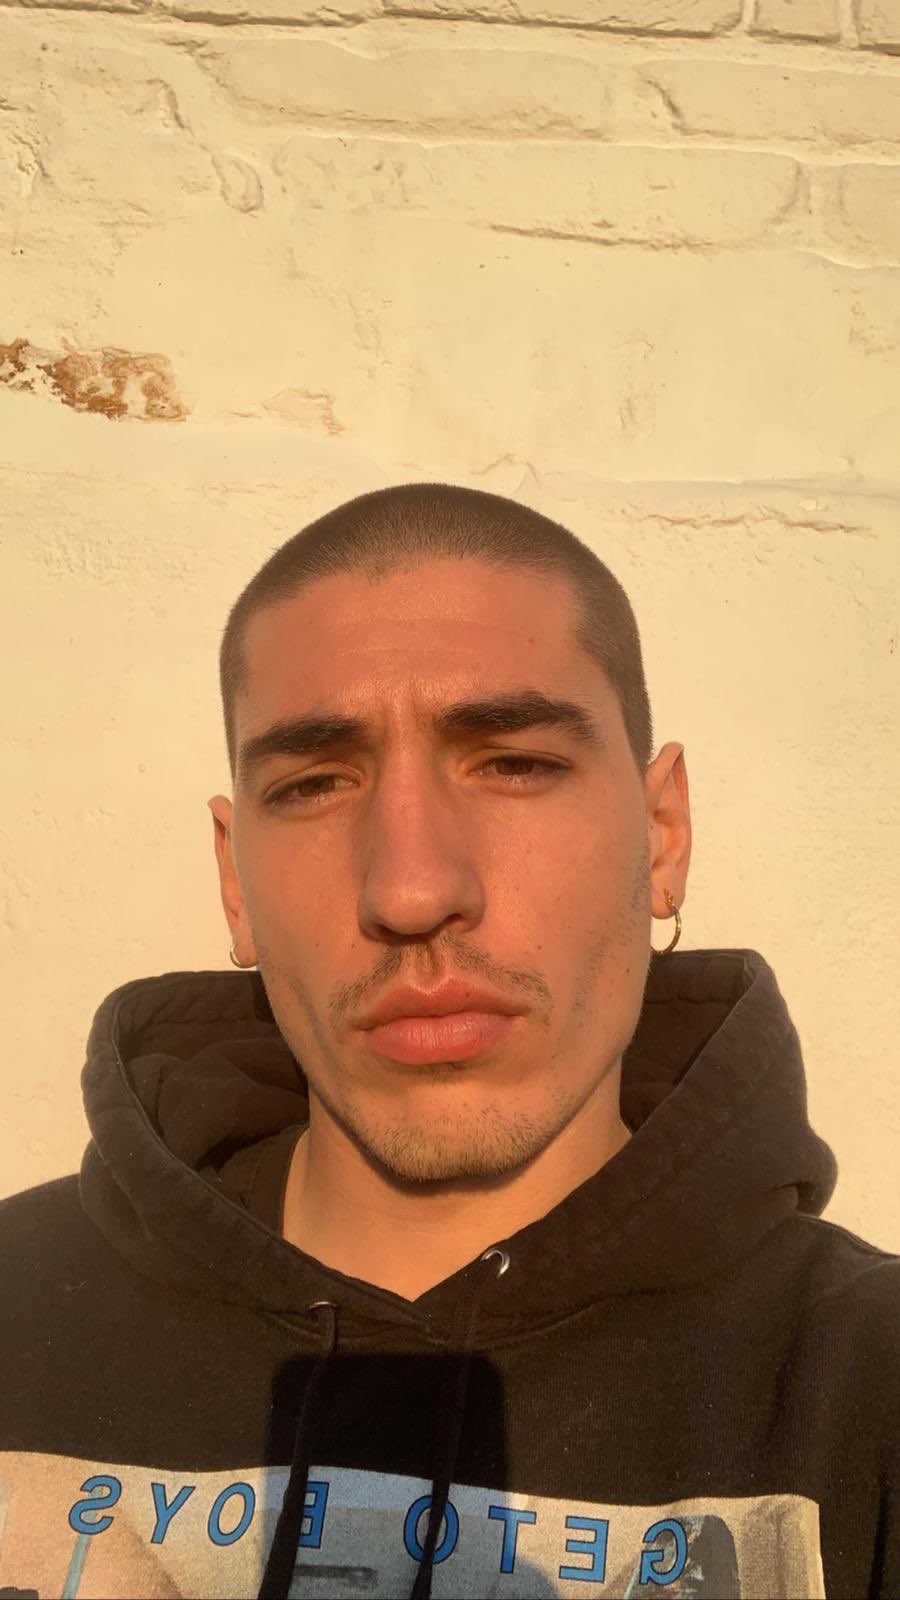 Football Tweet ⚽ on X: 🎙️ Hector Bellerin: “We should be the ones ready  to contribute to the stability of our society. Everyone wants to earn more,  be more comfortable, but I